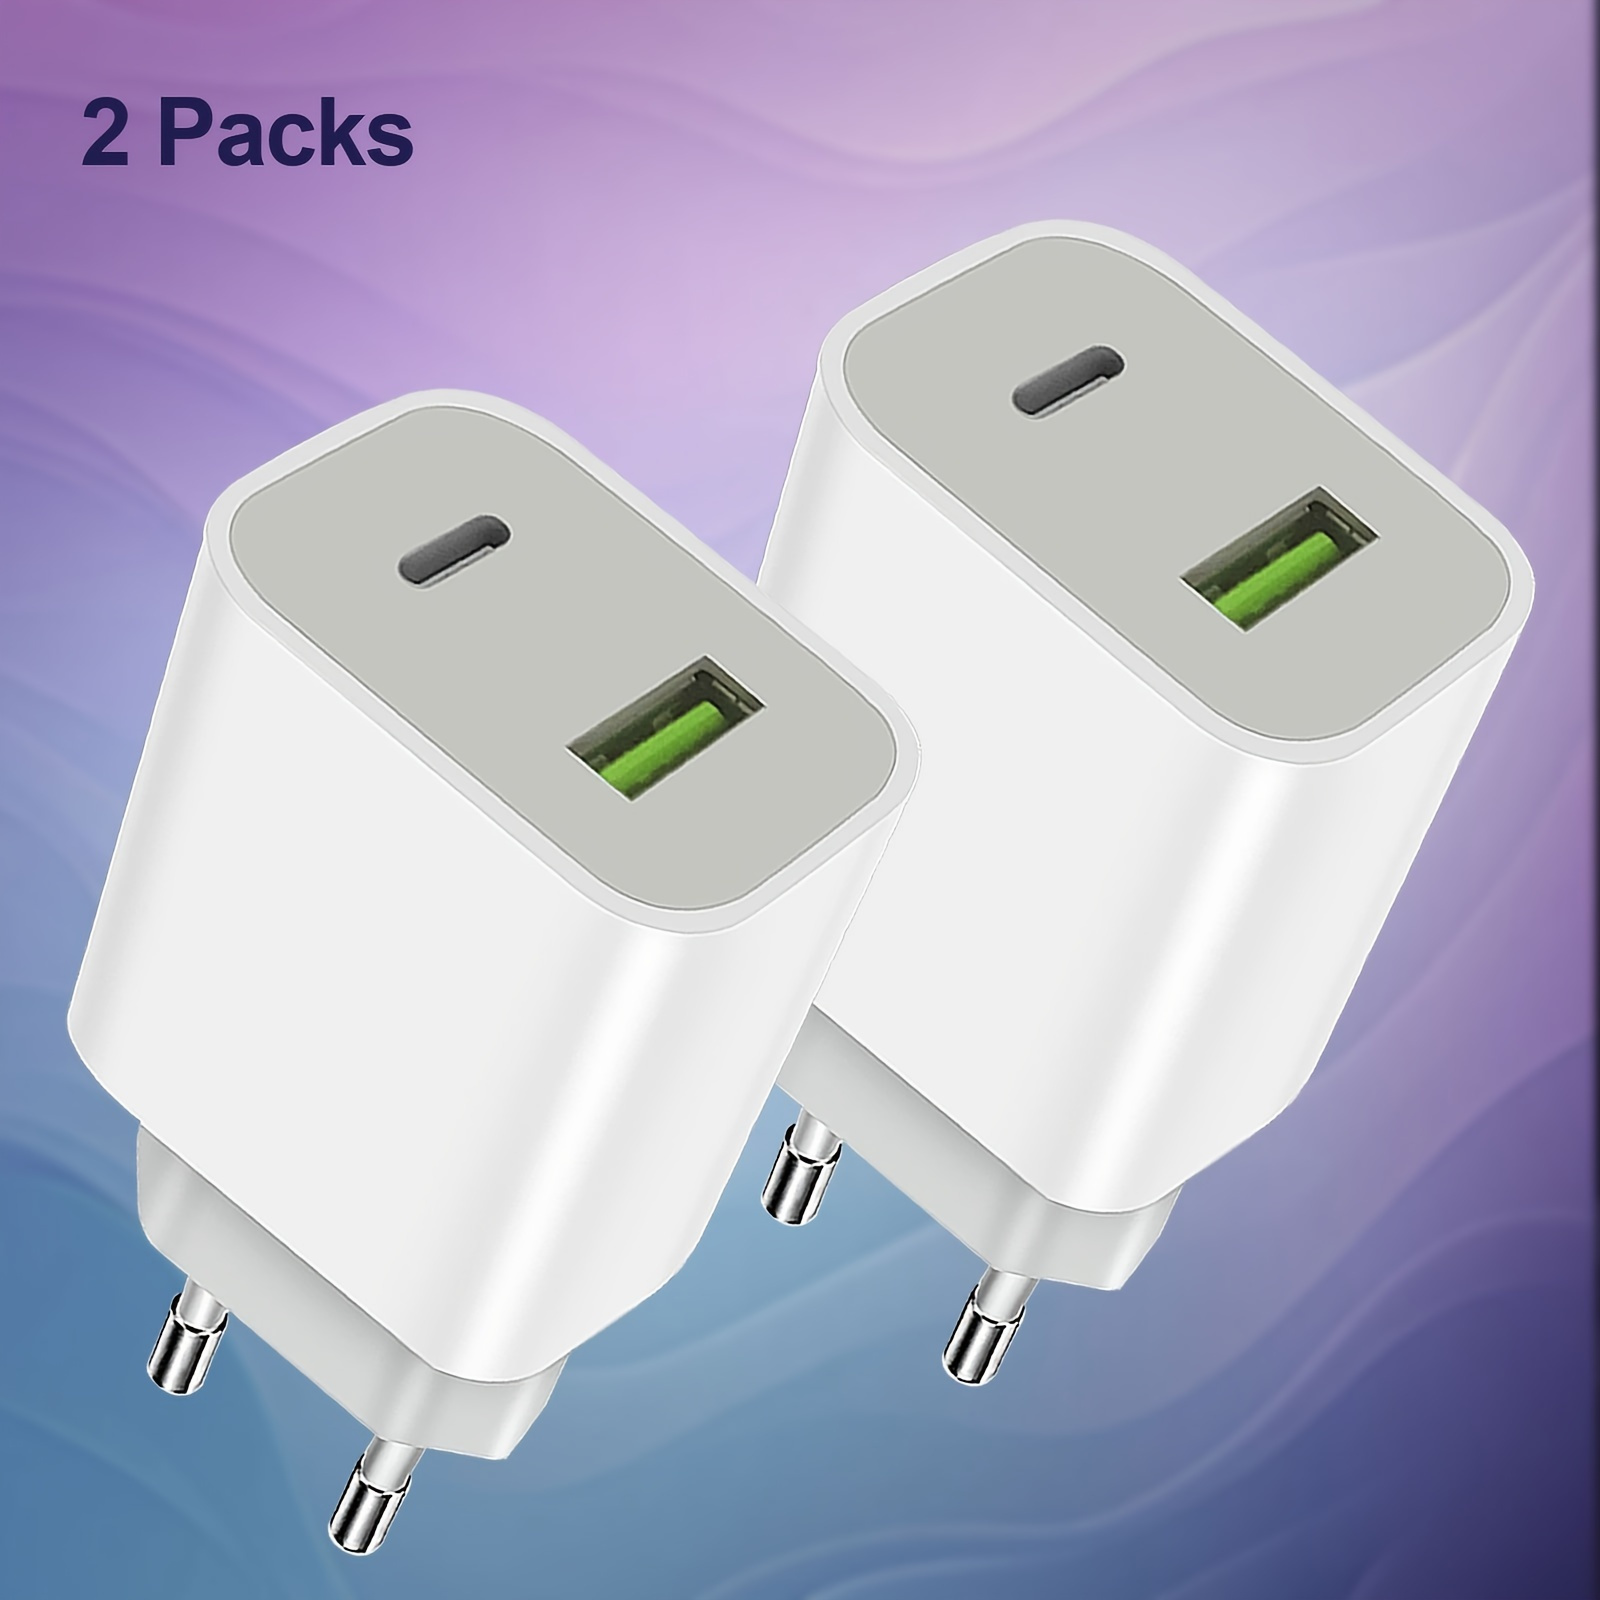 

2-pack With Fast Charging, Universal Power Adapter For 14/14 Pro/13/12/11/xs, Samsung Galaxy, Connector, 220-240v European Standard Plug, 10-20w Output Power